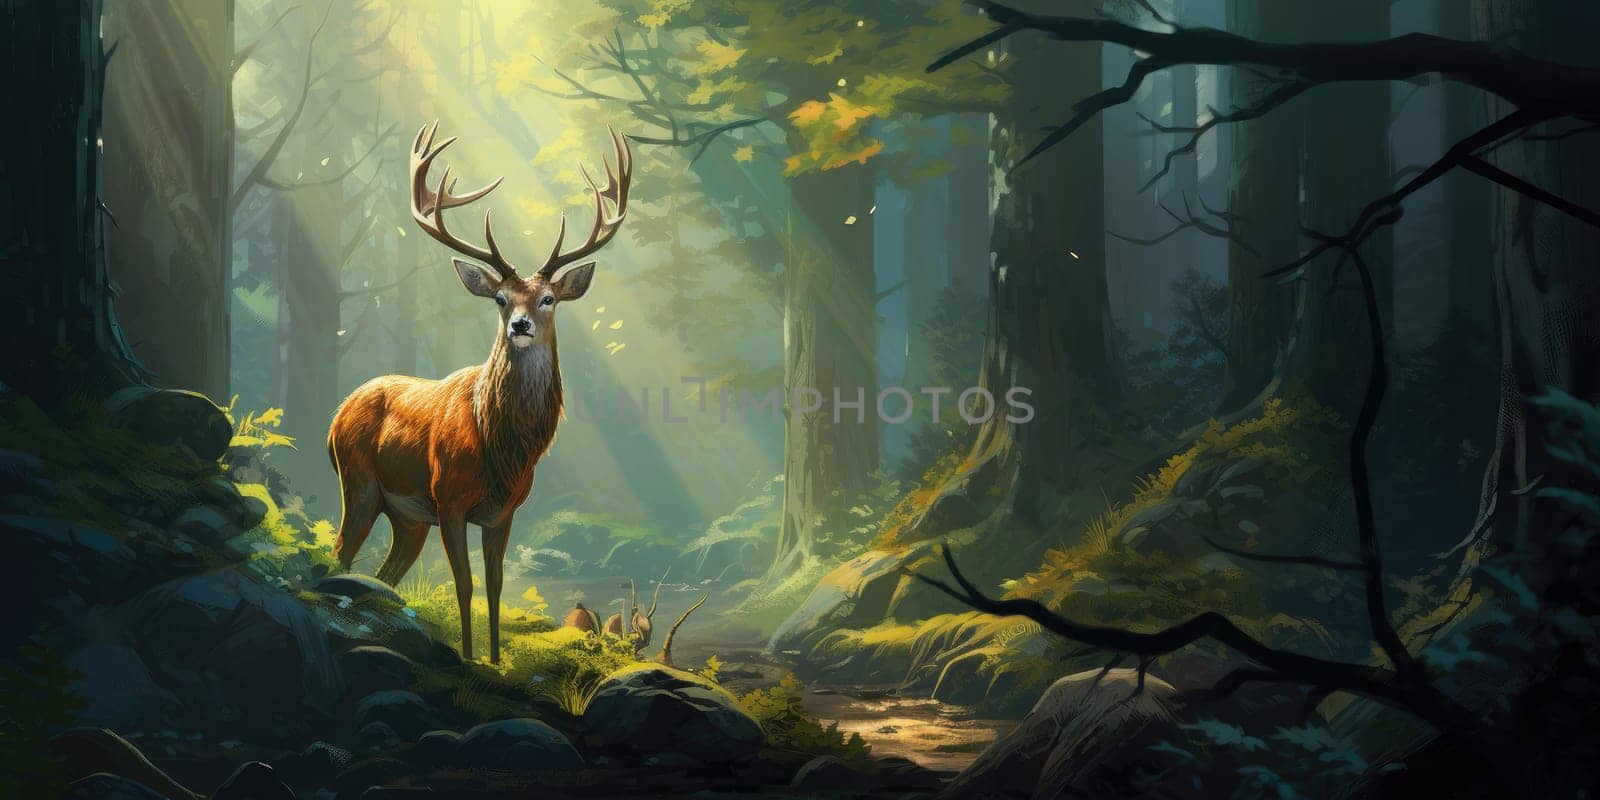 Deer in the nature, hoofed grazing or browsing animal, with branched bony antlers that are shed annually and typically borne only by the male